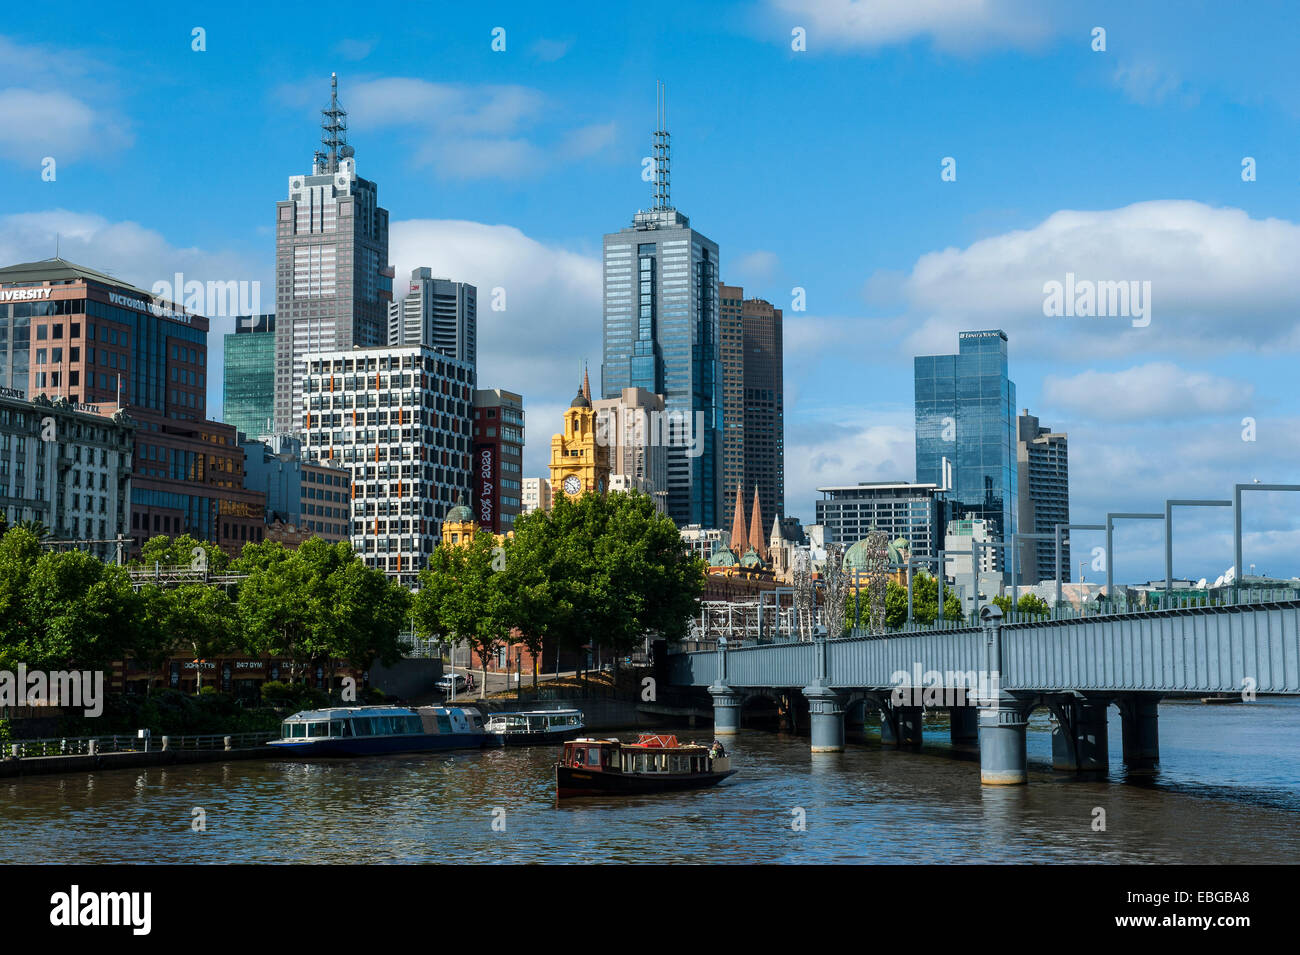 High rise buildings on the Yarra river, Melbourne, Victoria Stock Photo